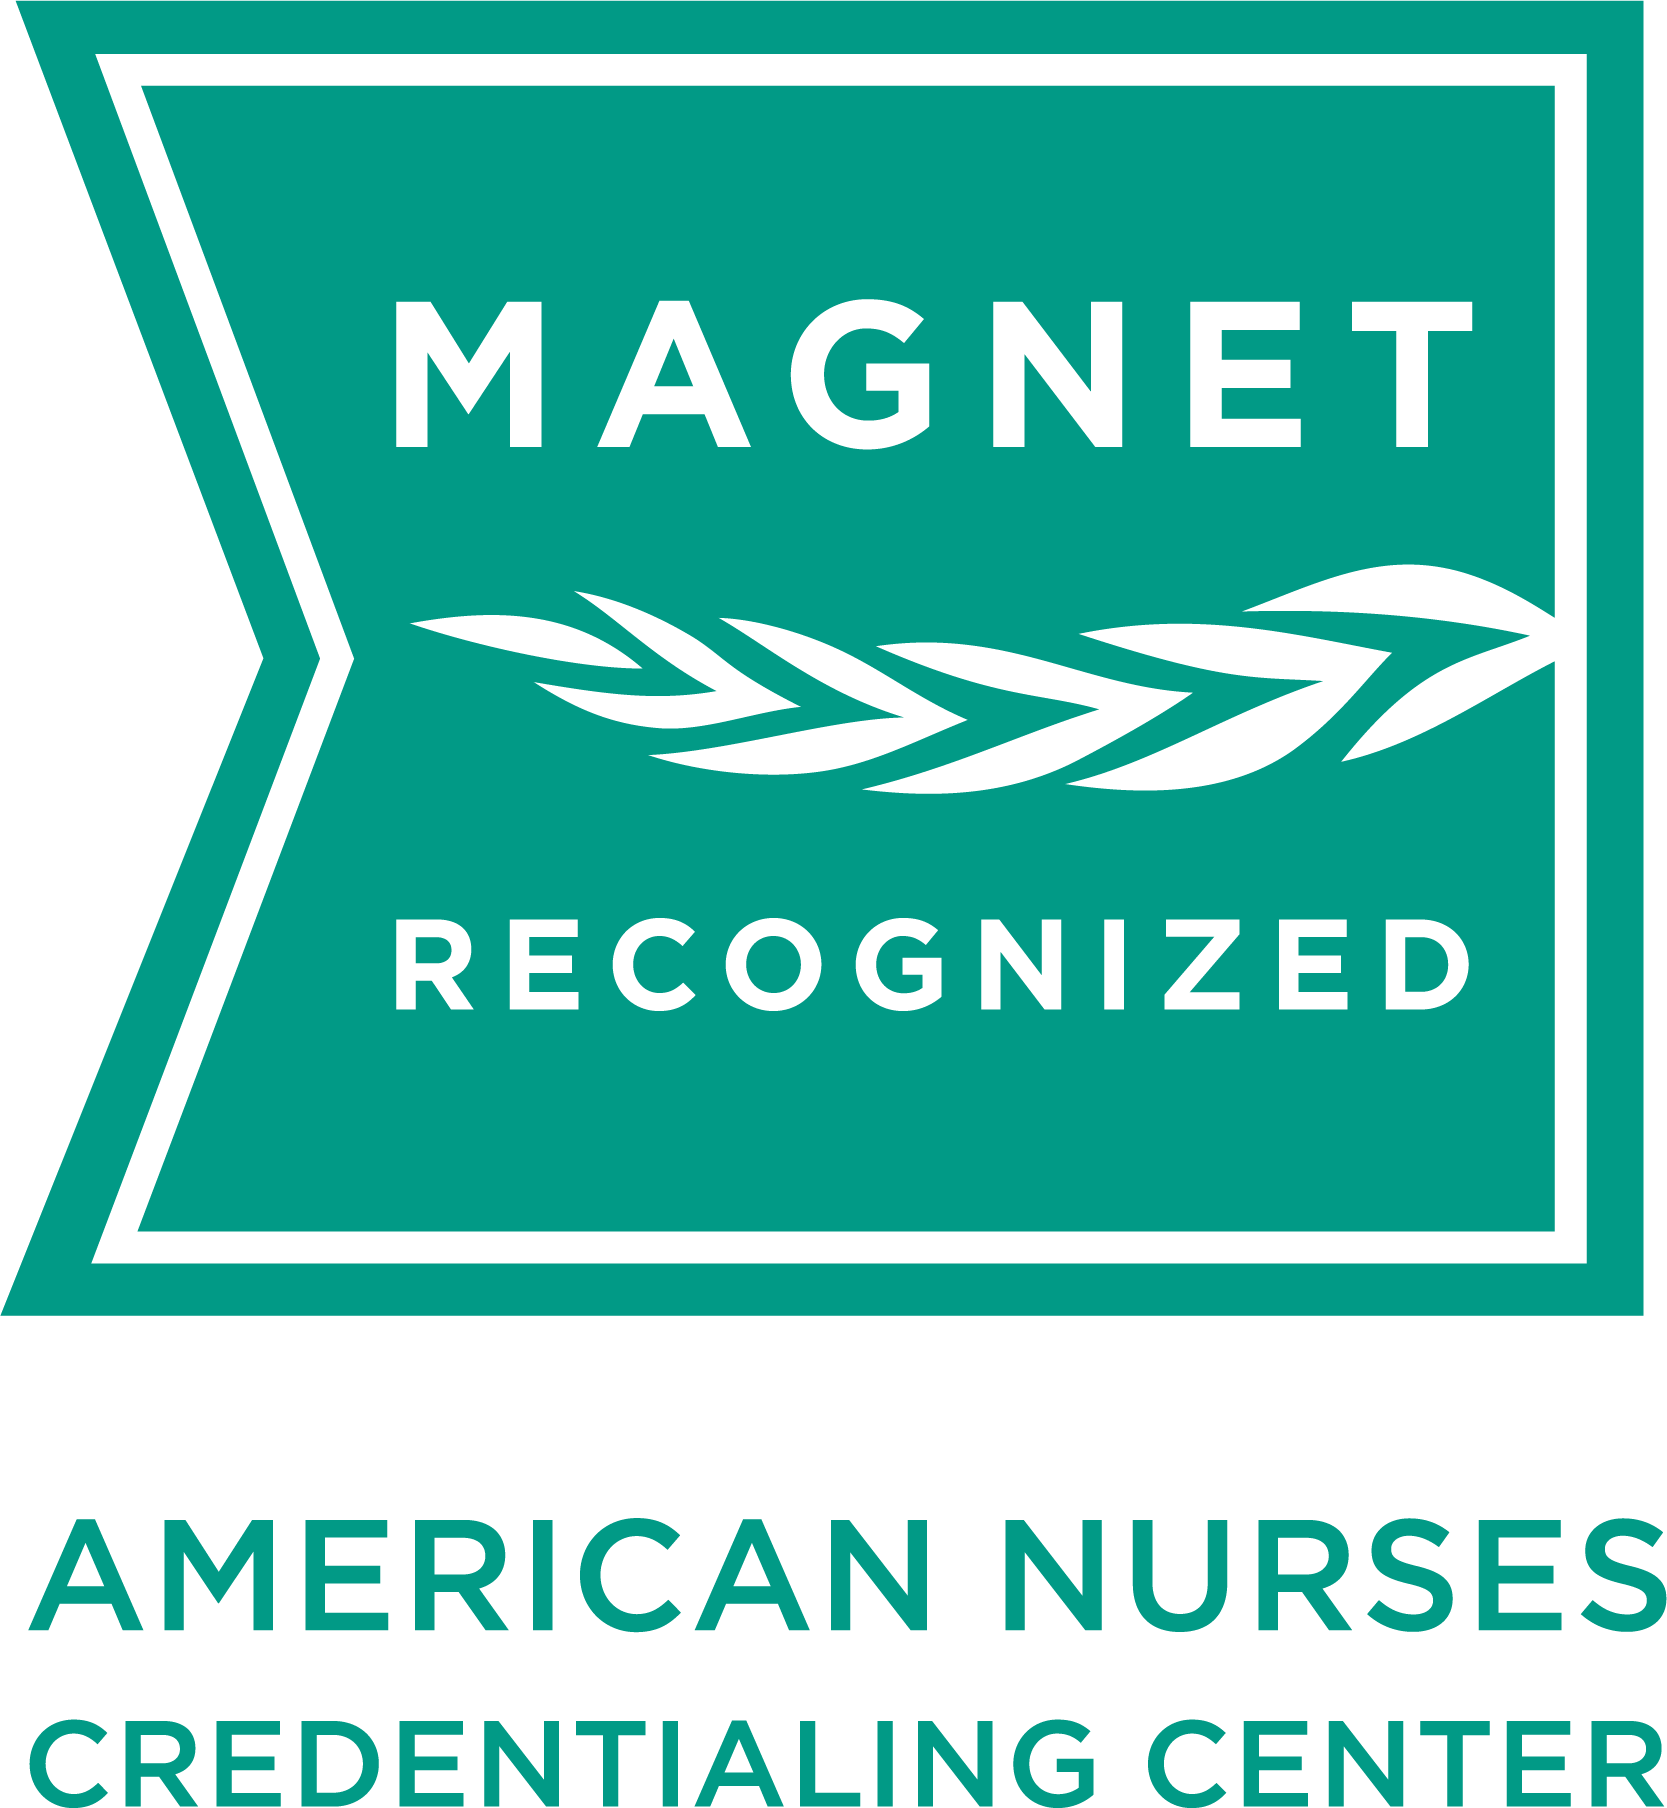 Magnet recognised badge from the American Nurses Credentialing Center.